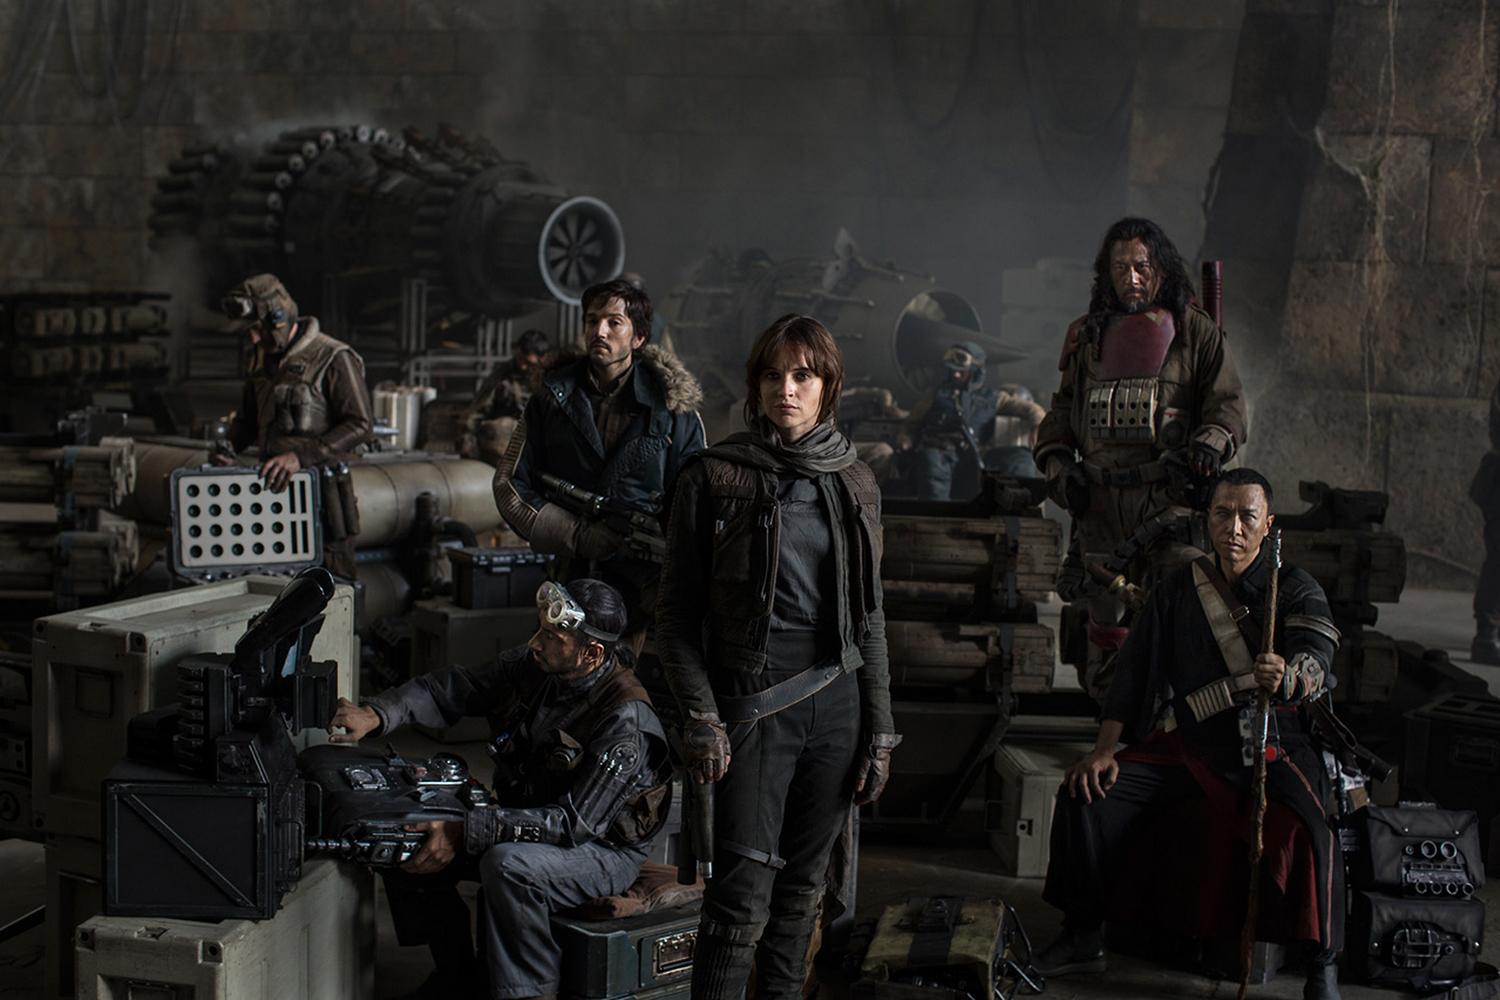 rogue one star wars story live stream twitter